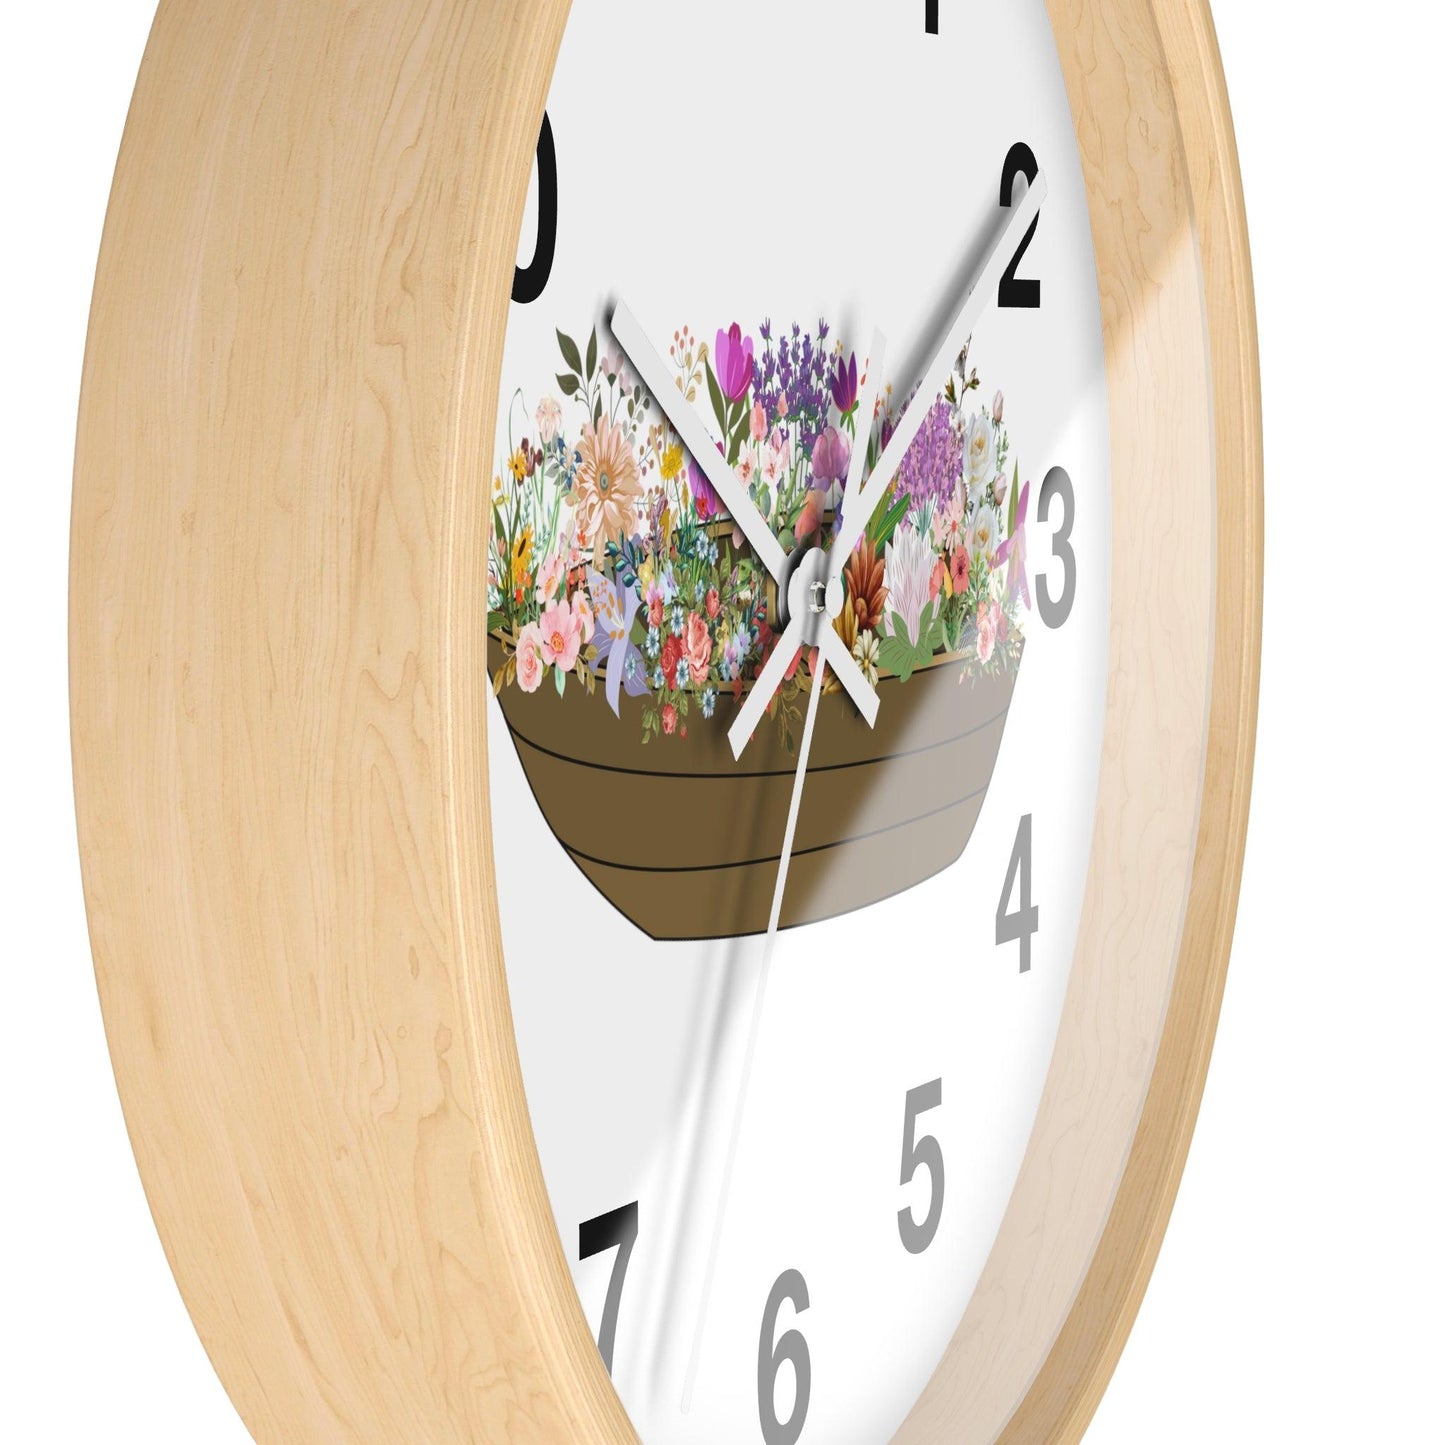 Boat Flower Wall Clock Floral Wall Clock Home Decor Gift House Warming gift - Unique Gift Farmhouse Clocks For Wall Living Room Bedroom